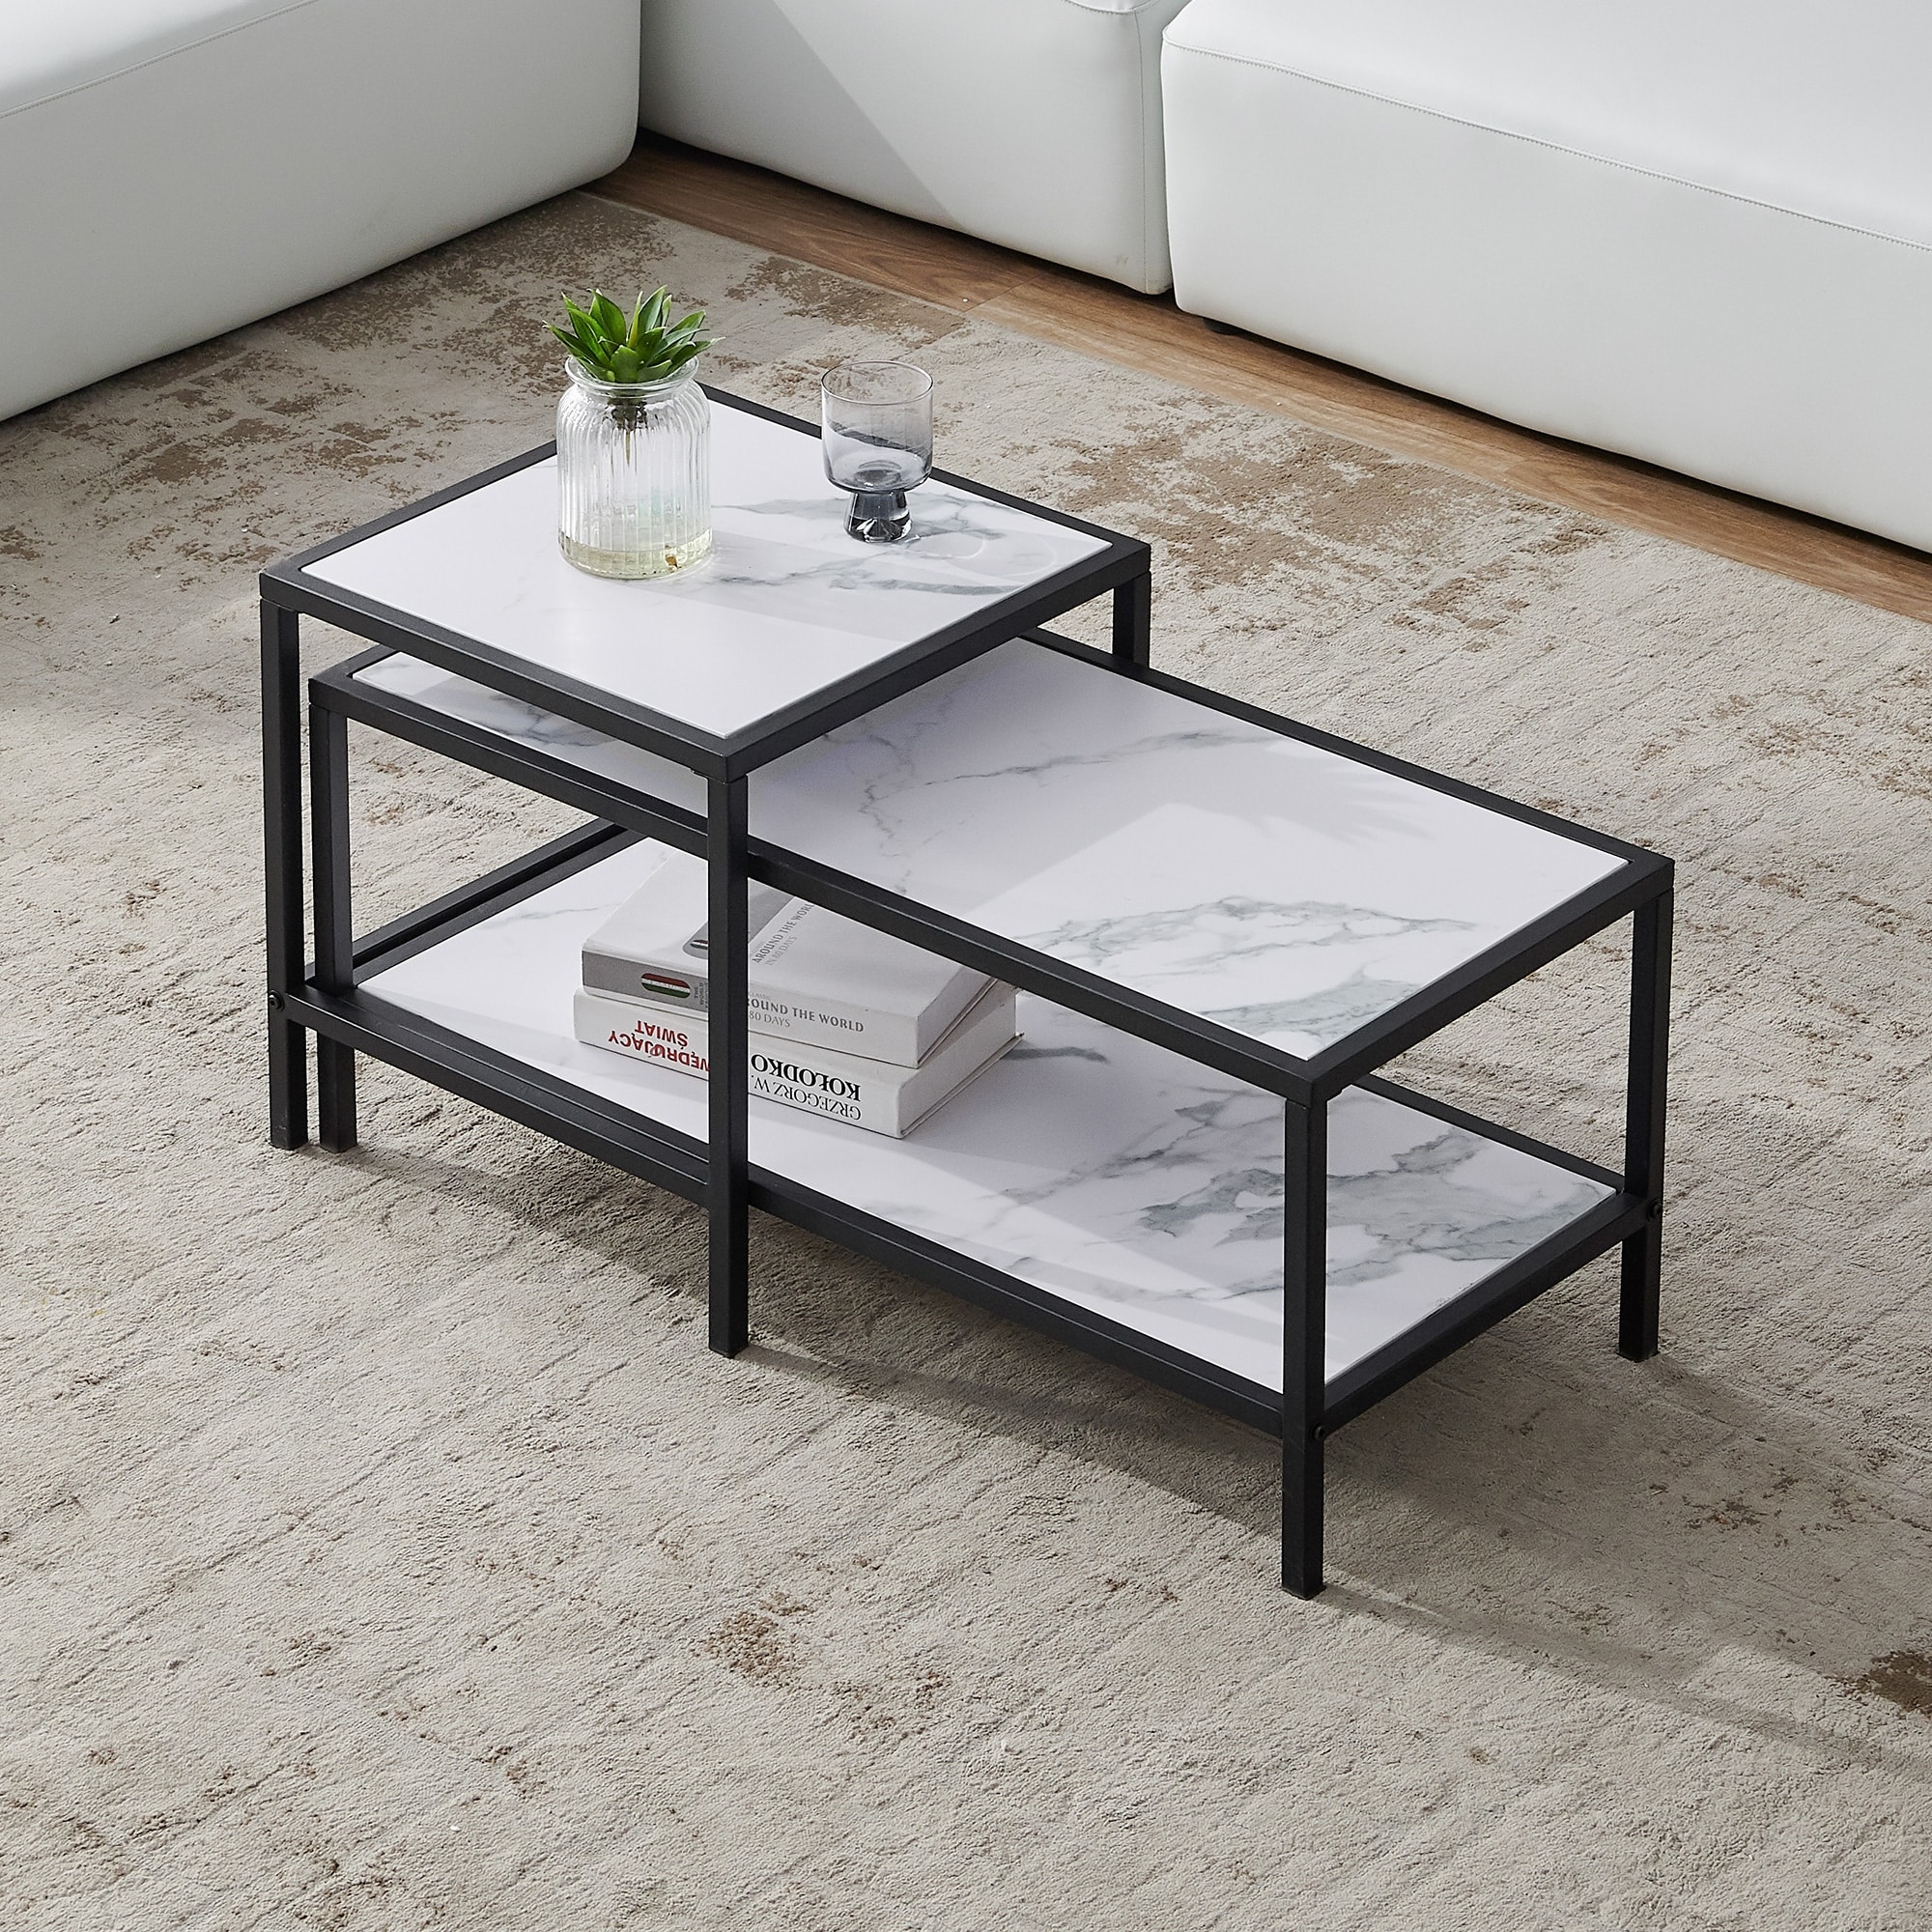 https://ak1.ostkcdn.com/images/products/is/images/direct/816ef3254a802a82a1ff8560406ebefd3ba1f820/Nesting-coffee-table-Square-%26-rectangle%2CGolden-metal-frame-with-wood-marble-color-top.jpg